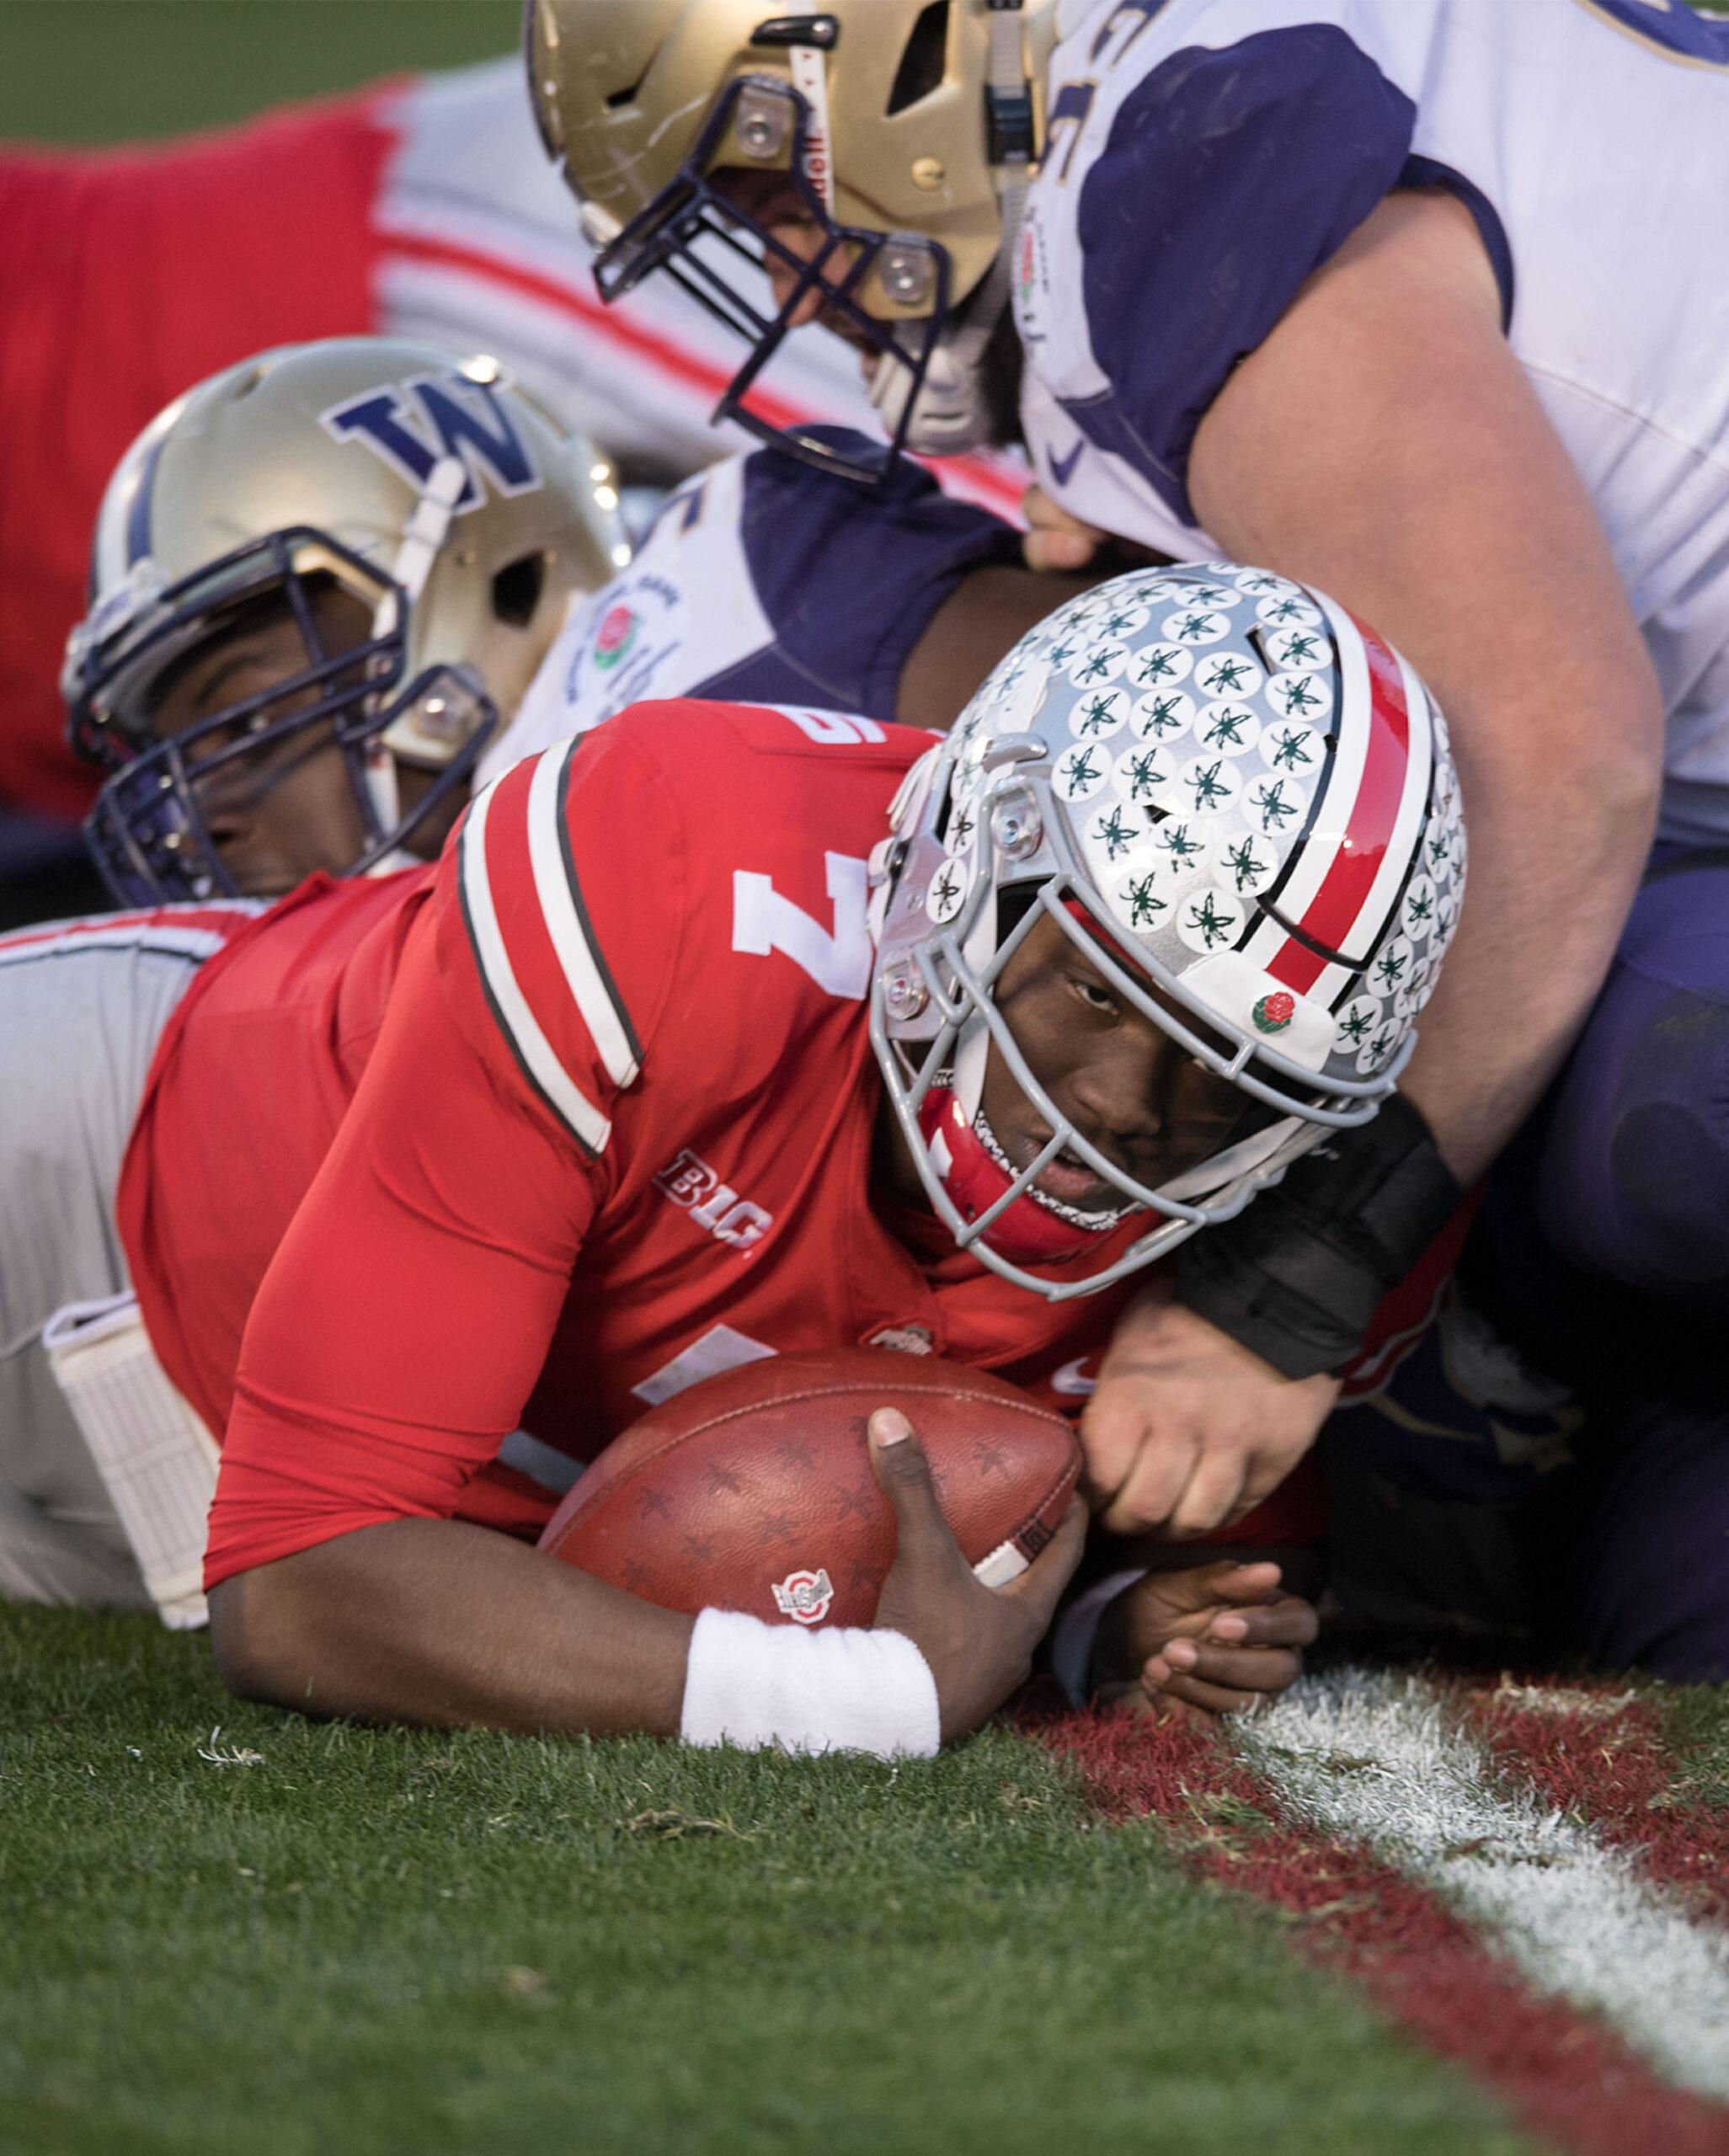 1 Johnnie Dixon, WR of the Ohio State Buckeyes is blocked by defender of the Washington Huskies during the 105th Rose Bowl Game held at the Rose Bowl Stadium in Pasadena, California on Tuesday January 1, 2019. 01 Jan 2019 Pictured: 7 Dwayne Haskins, QB of the Ohio State Buckeyes passes the ball during their game with the Washington Huskies at the 105th Rose Bowl Game held at the Rose Bowl Stadium in Pasadena, California on Tuesday January 1, 2019. Photo credit: ZUMAPRESS.com / MEGA TheMegaAgency.com +1 888 505 6342 (Mega Agency TagID: MEGA331120_015.jpg) [Photo via Mega Agency]